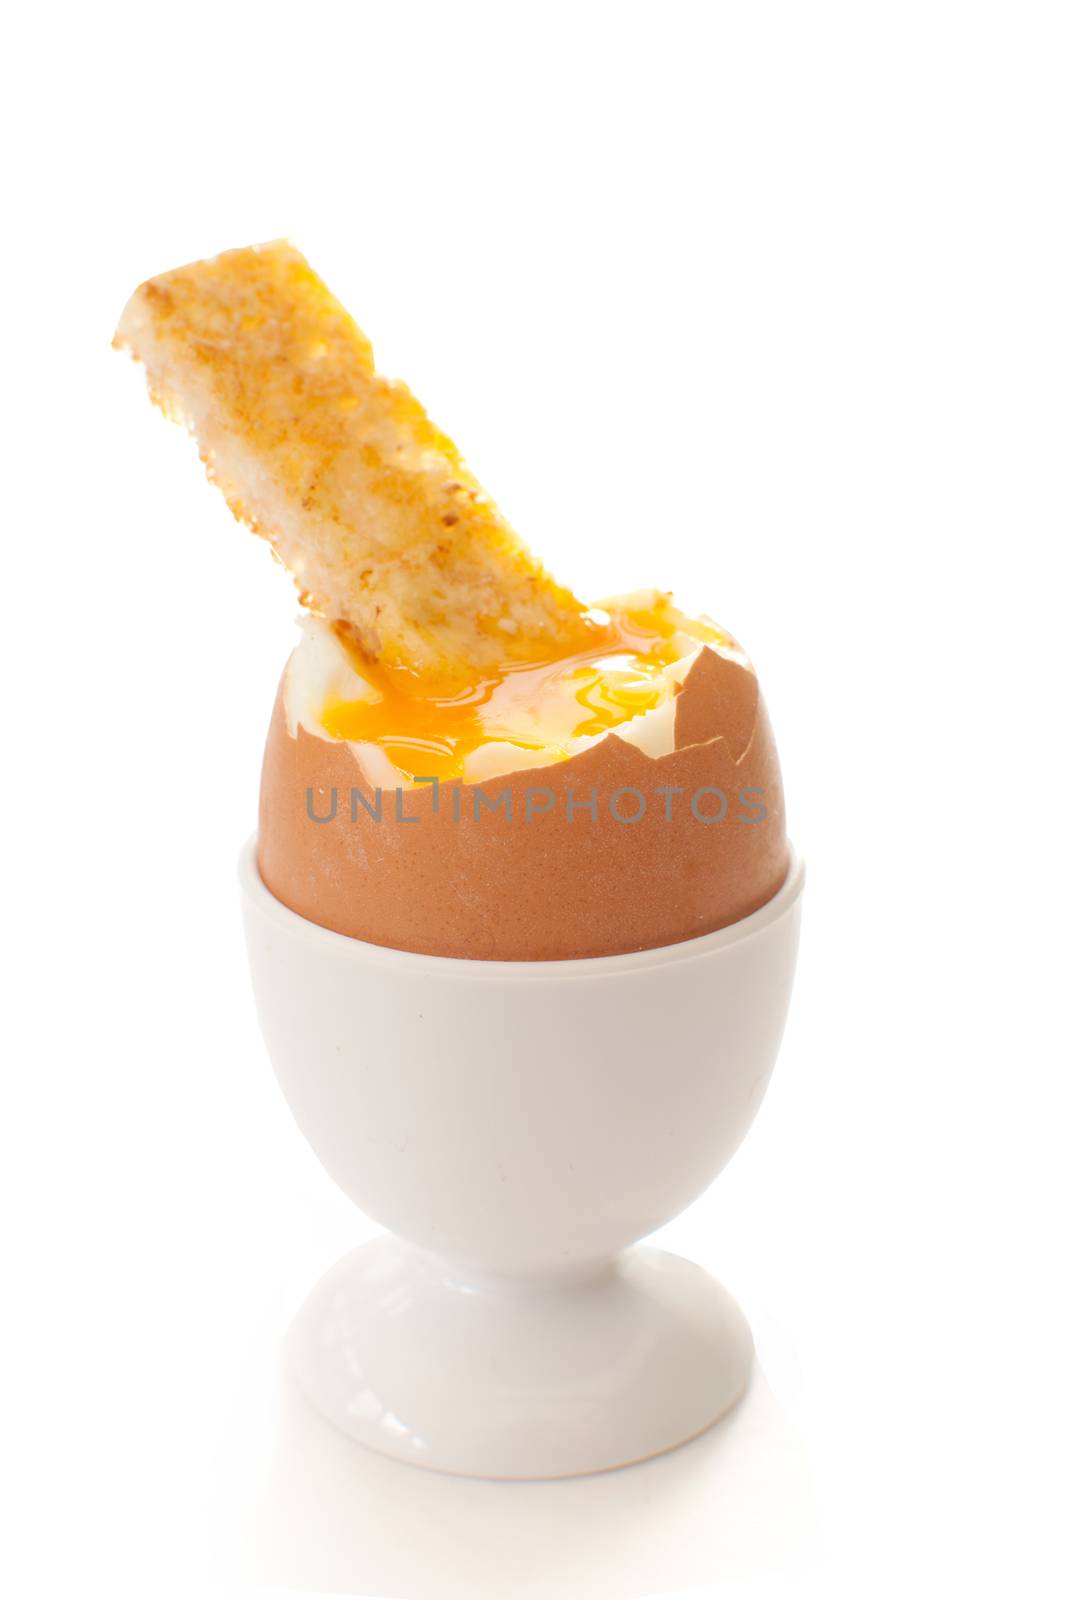 Boiled egg in a cup holder with a buttered toasted soldier